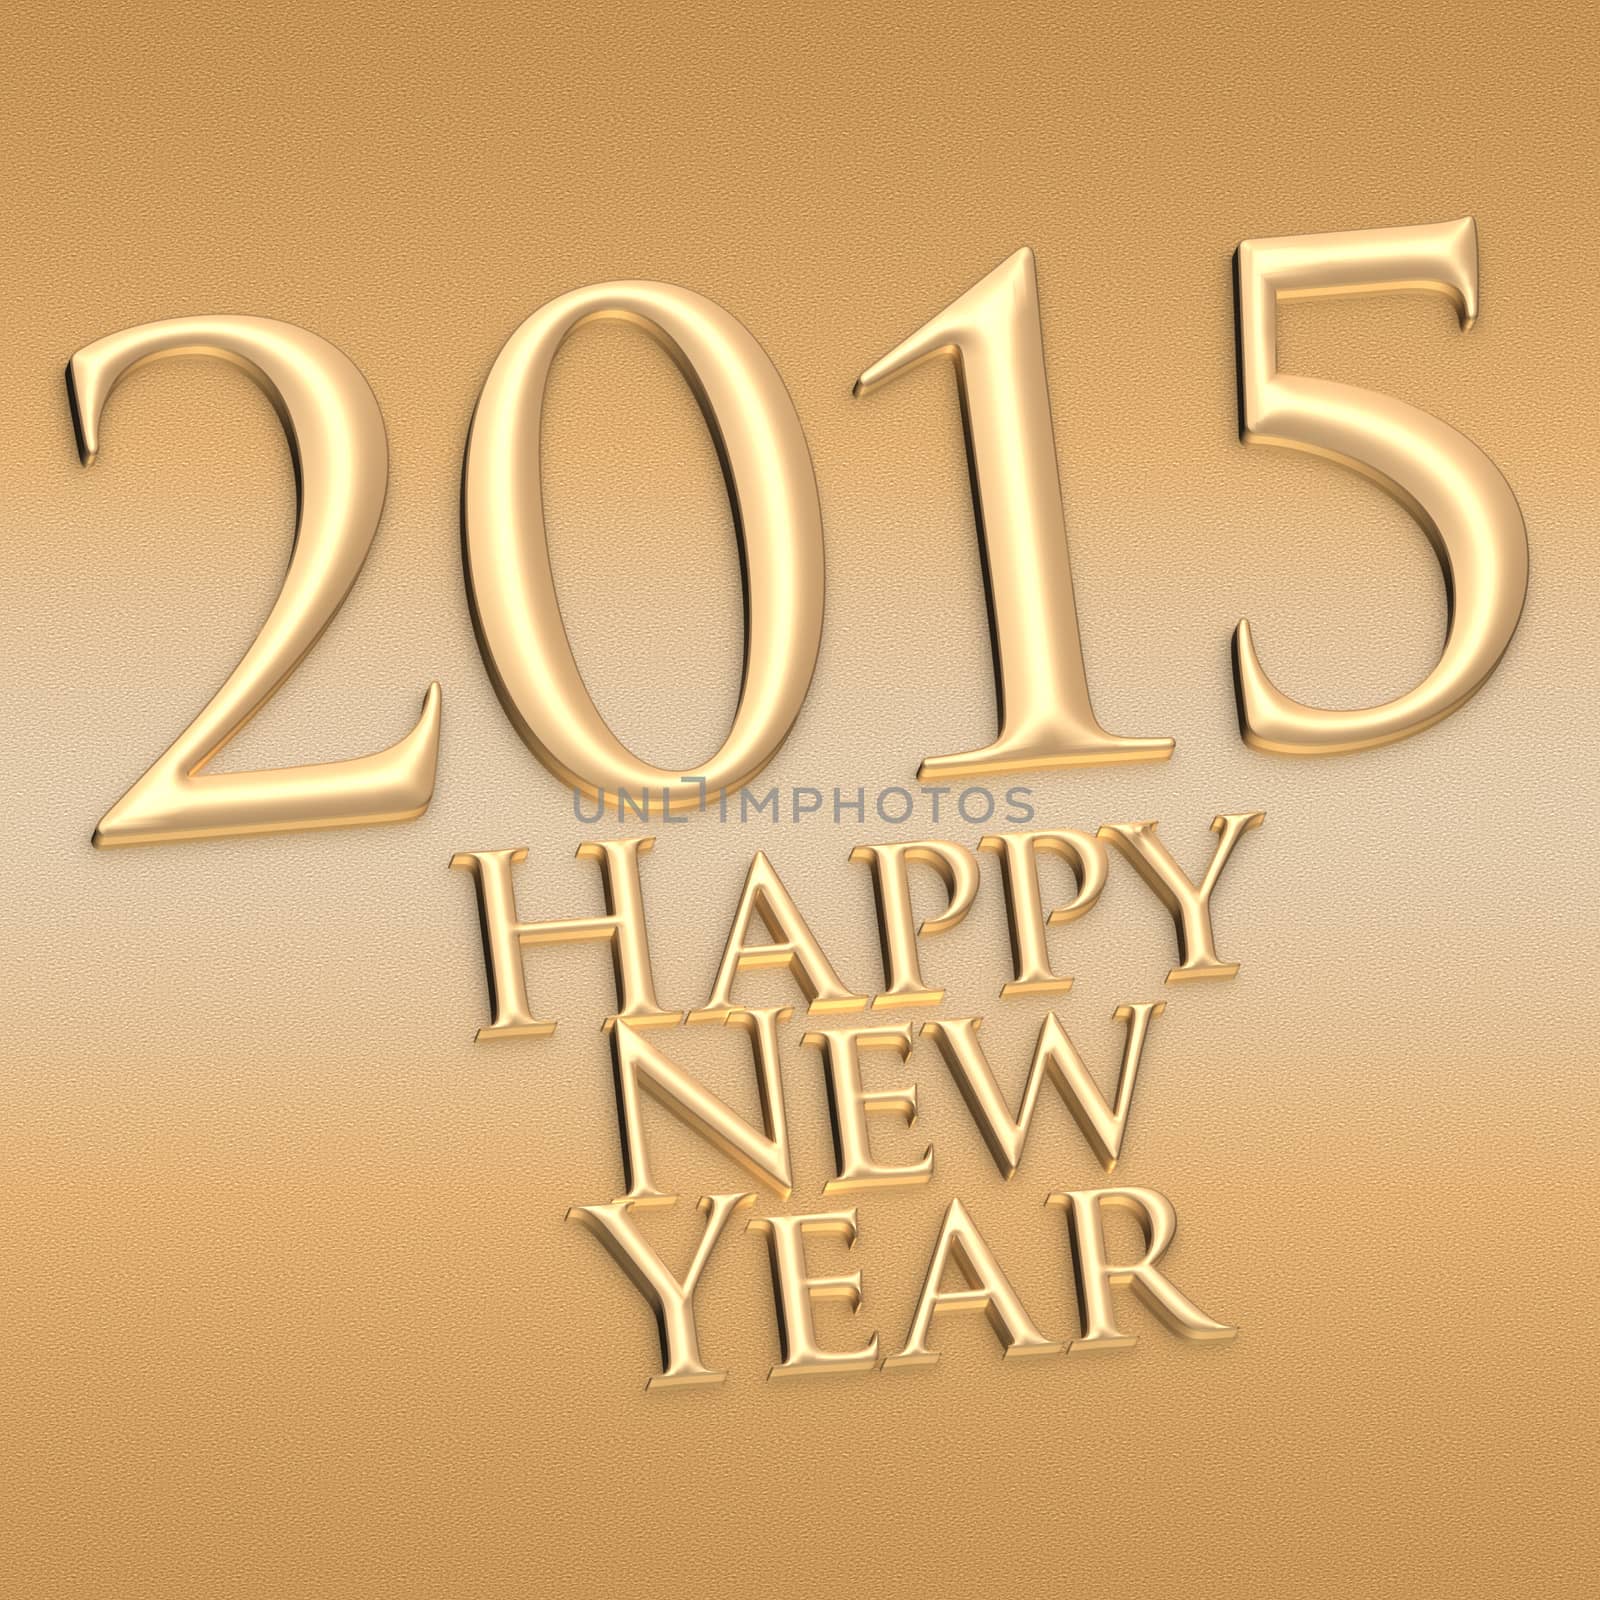 Happy New Year 2015 square greeting card.